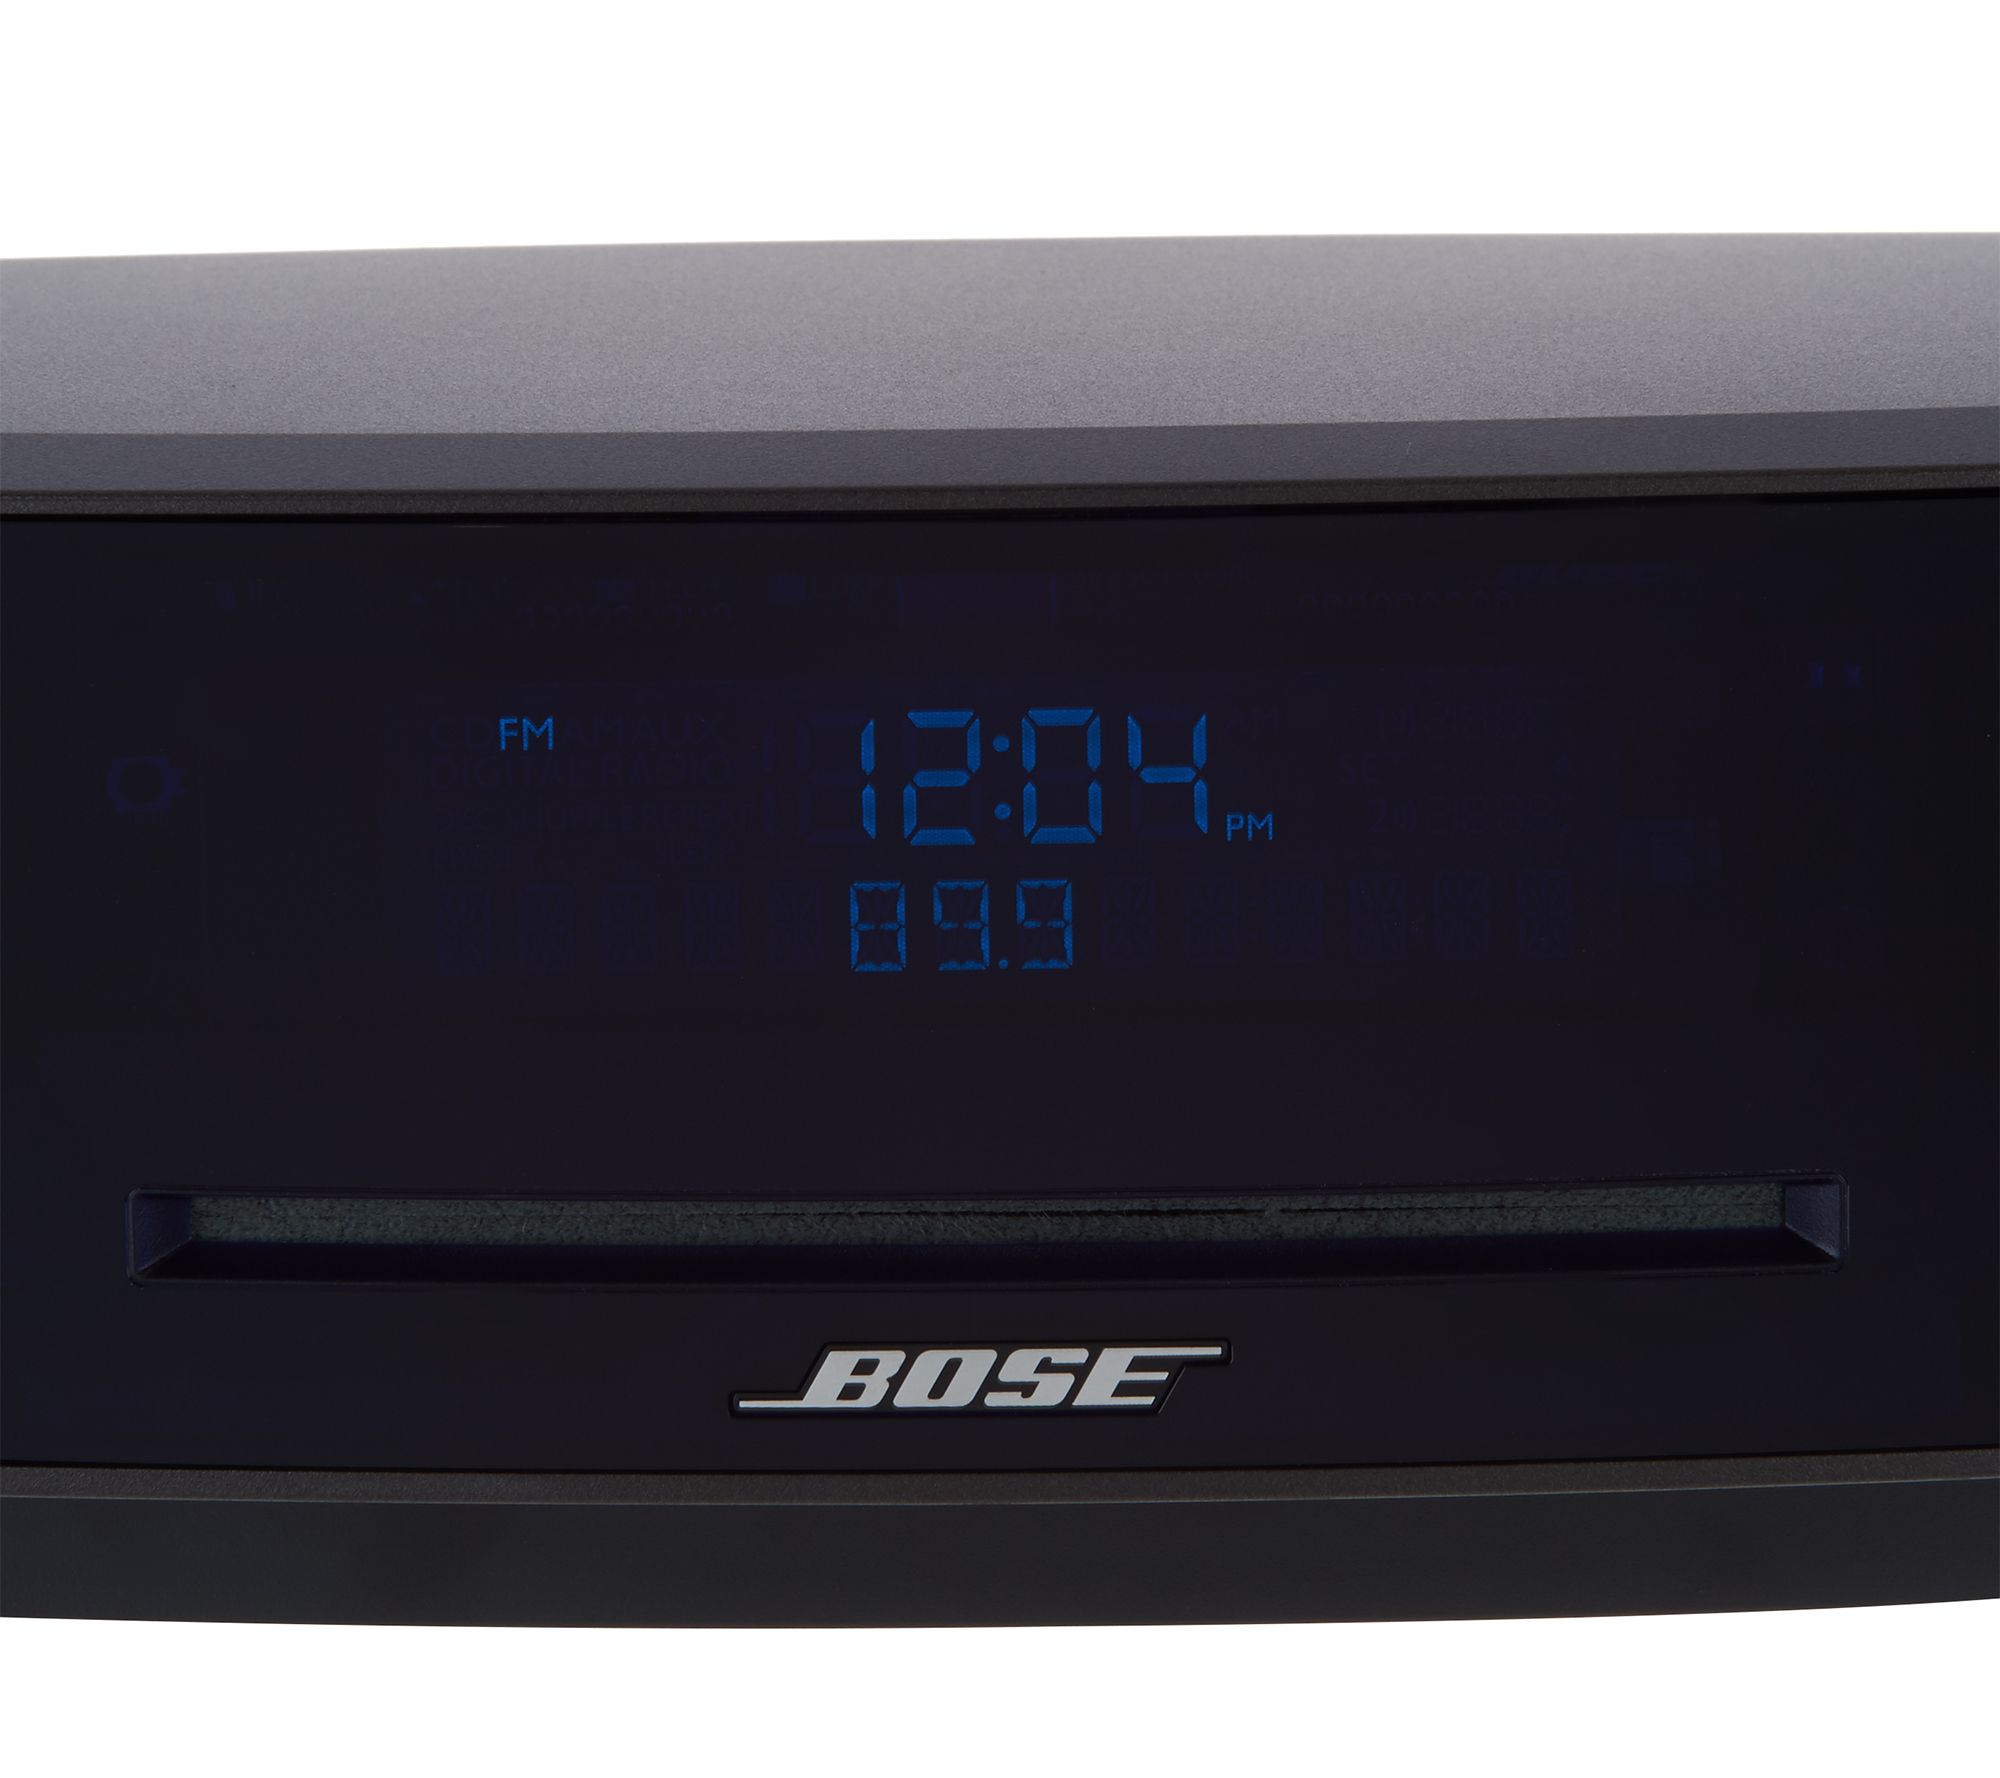 Le Bose Wave Music System SoundTouch IV 